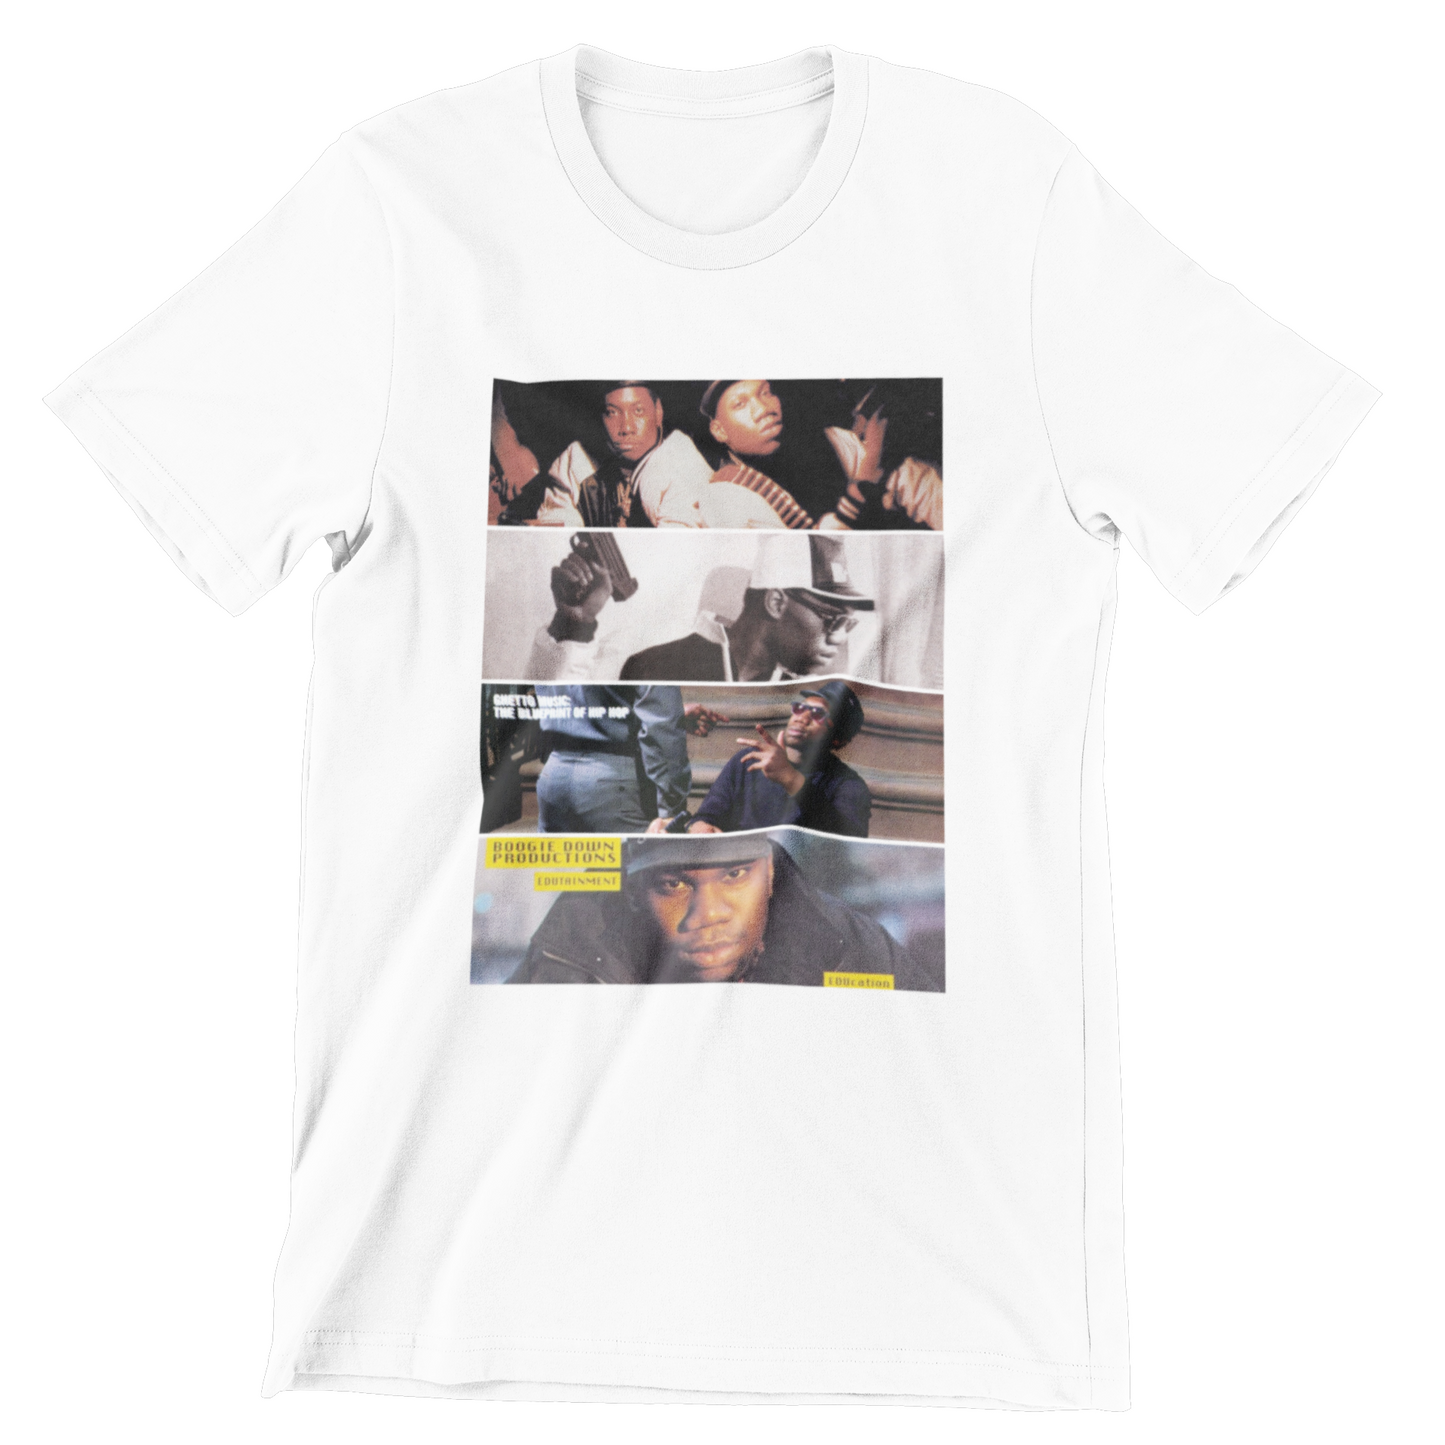 Boogie Down Productions (Album Cover Tee)